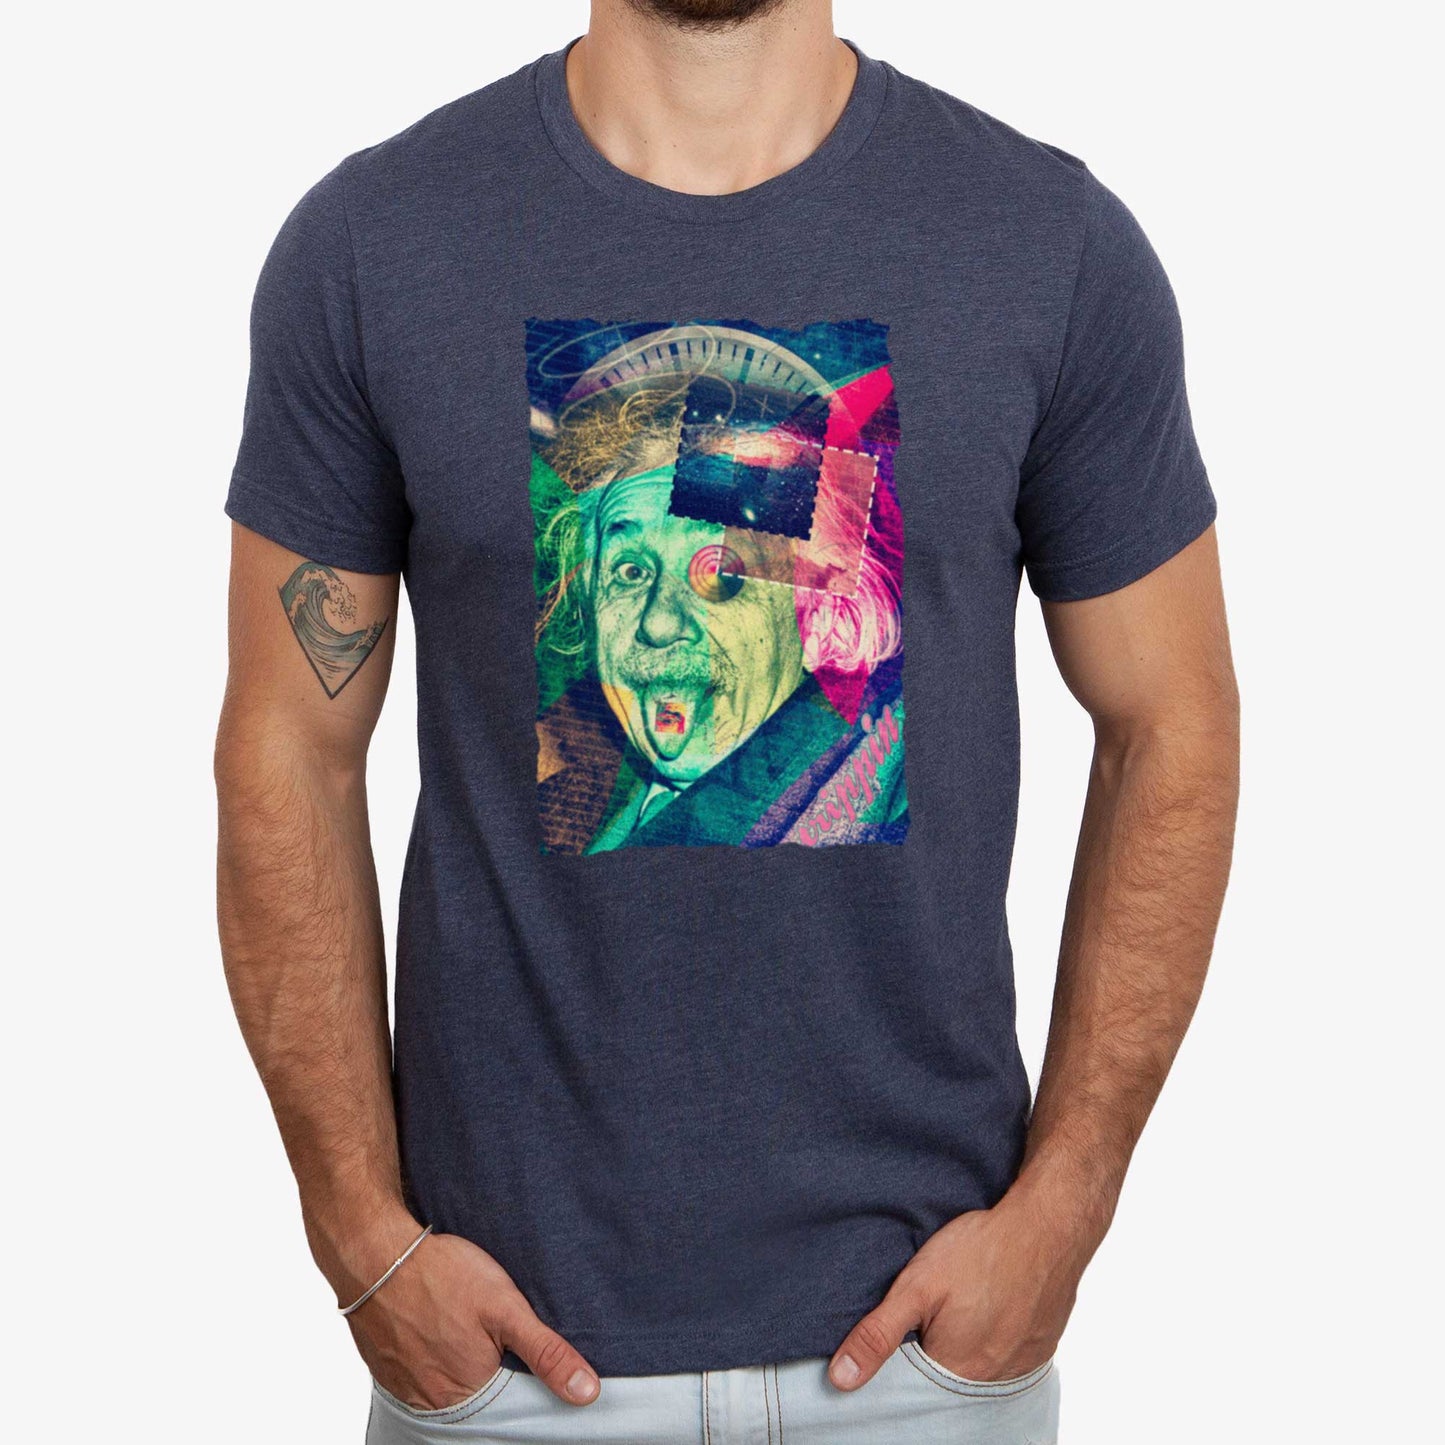 A man wearing a heather navy Bella Canvas t-shirt featuring the iconic Albert Einstein photo with his tongue out styled in a vaporwave aesthetic and a LSD paper on his tongue.